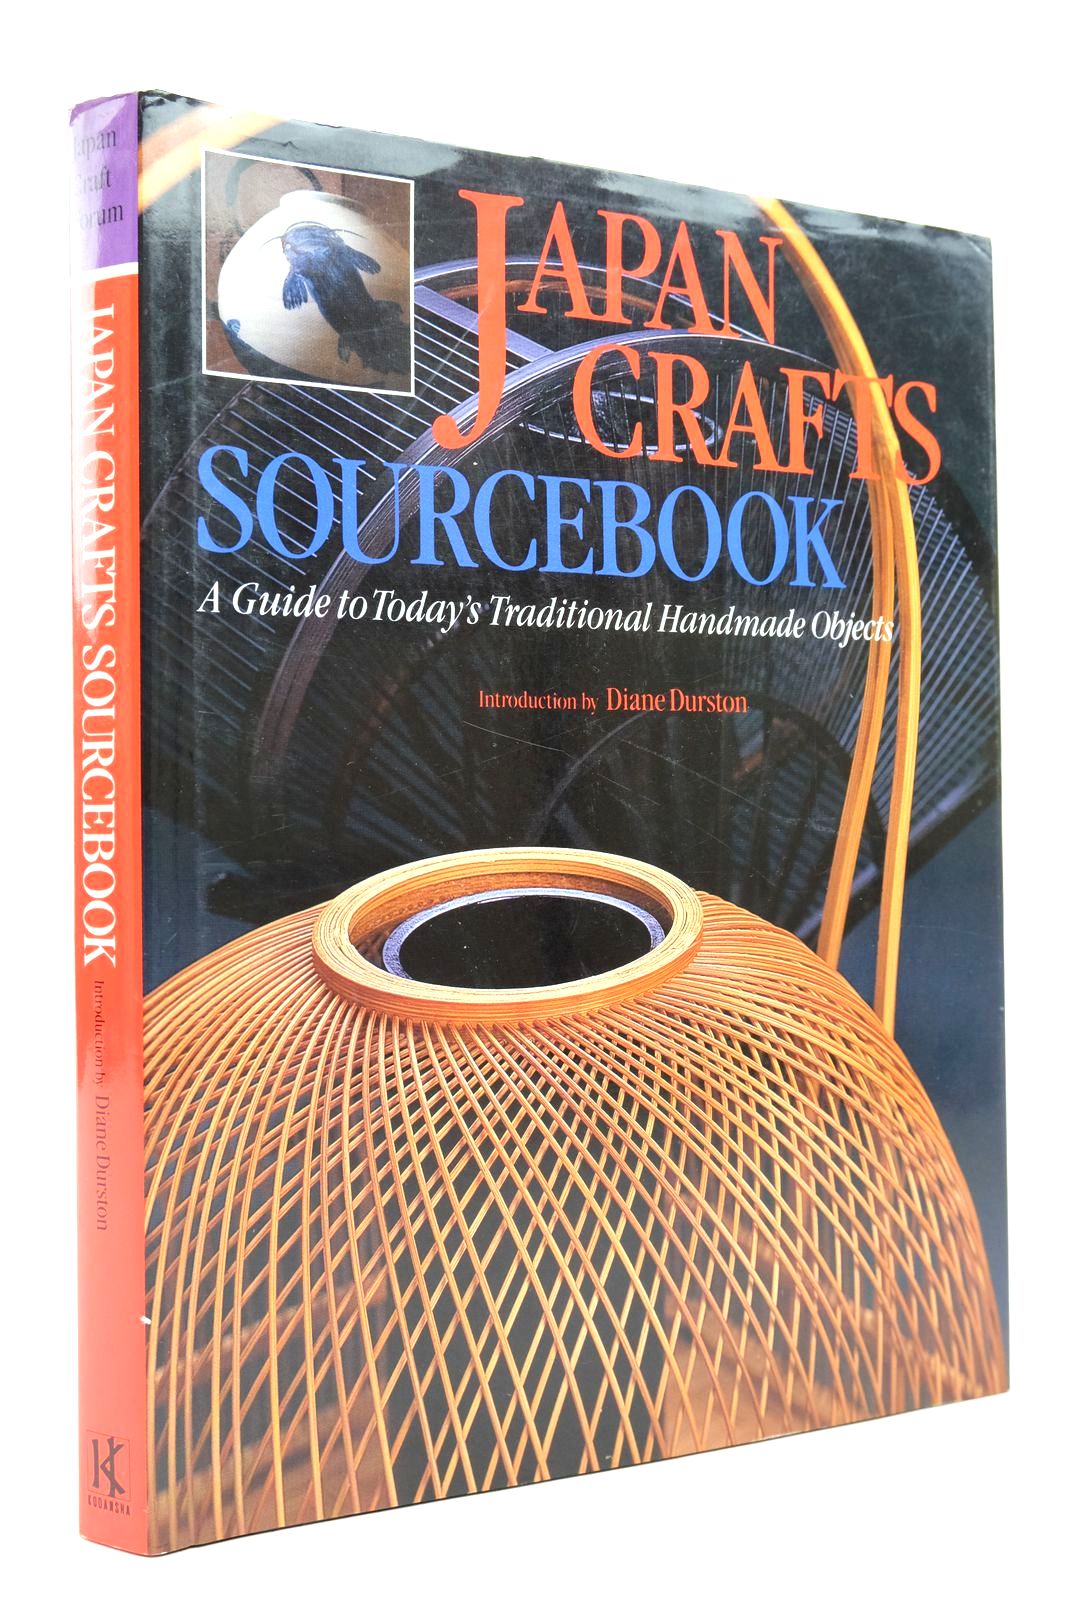 Photo of JAPAN CRAFTS SOURCEBOOK: A GUIDE TO TODAY'S TRADITIONAL HANDMADE OBJECTS written by Durston, Diane published by Kodansha International Ltd. (STOCK CODE: 2140813)  for sale by Stella & Rose's Books